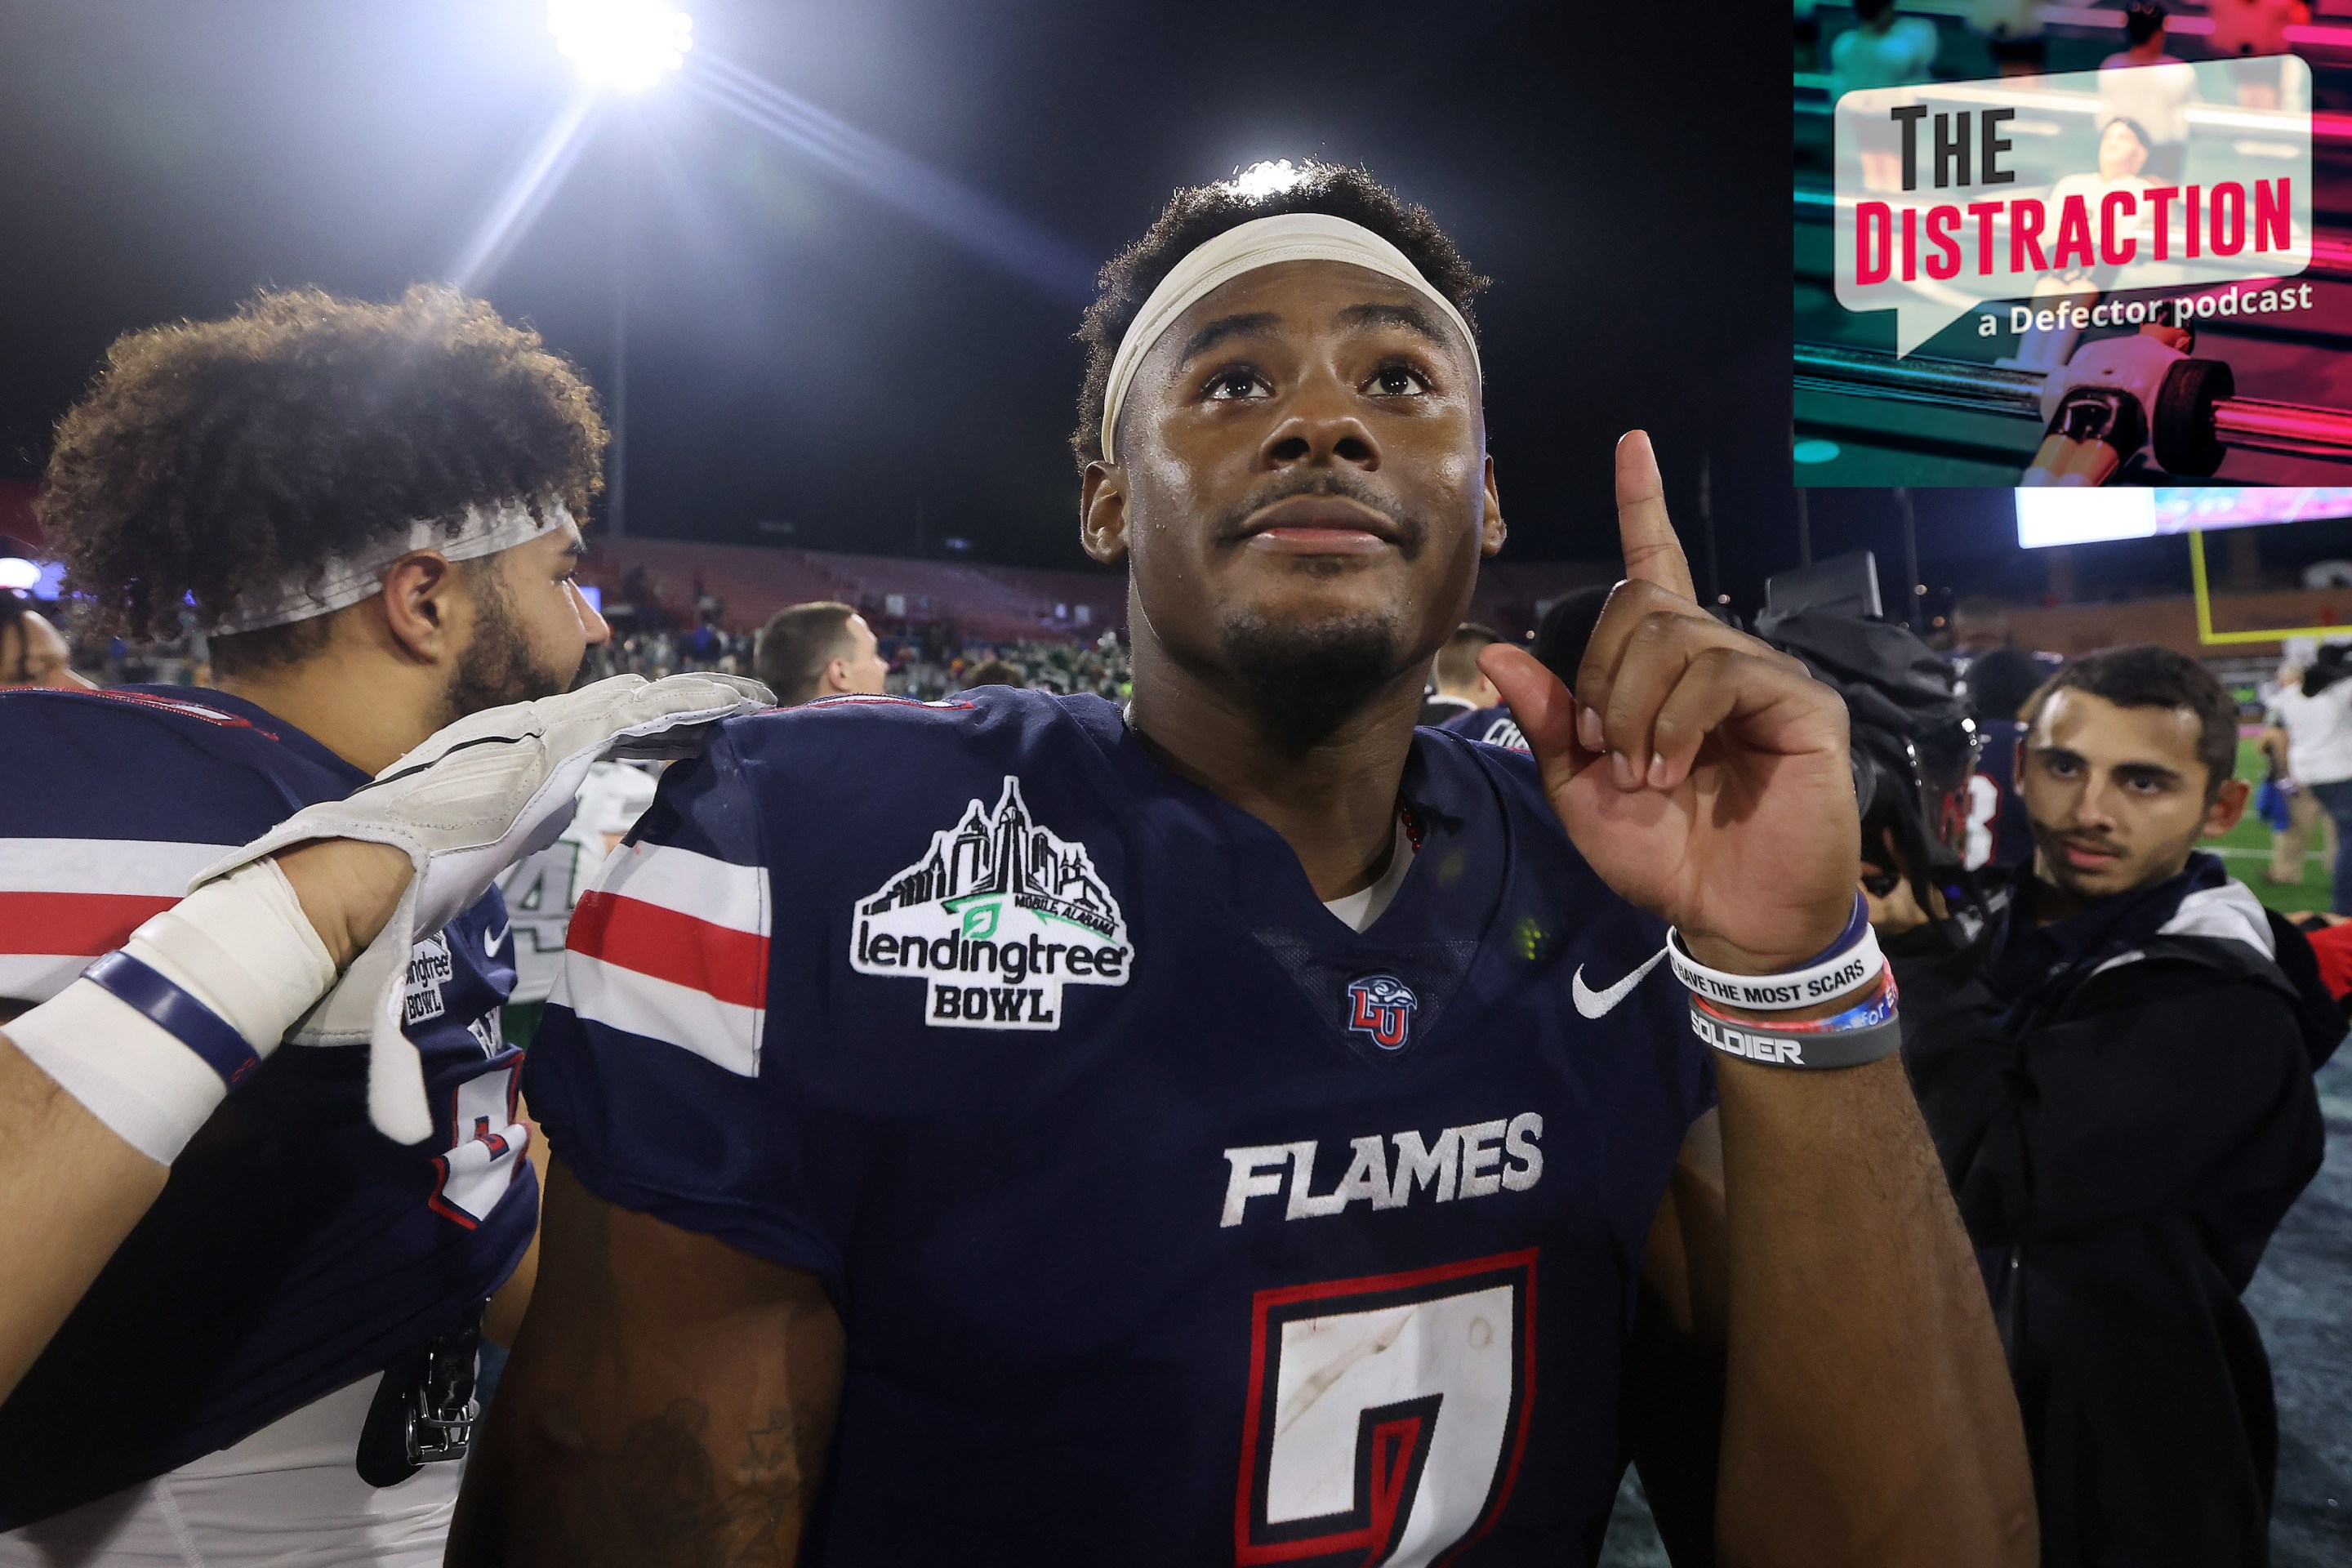 Malik Willis seen pointing upwards after the LendingTree Bowl, a real event.